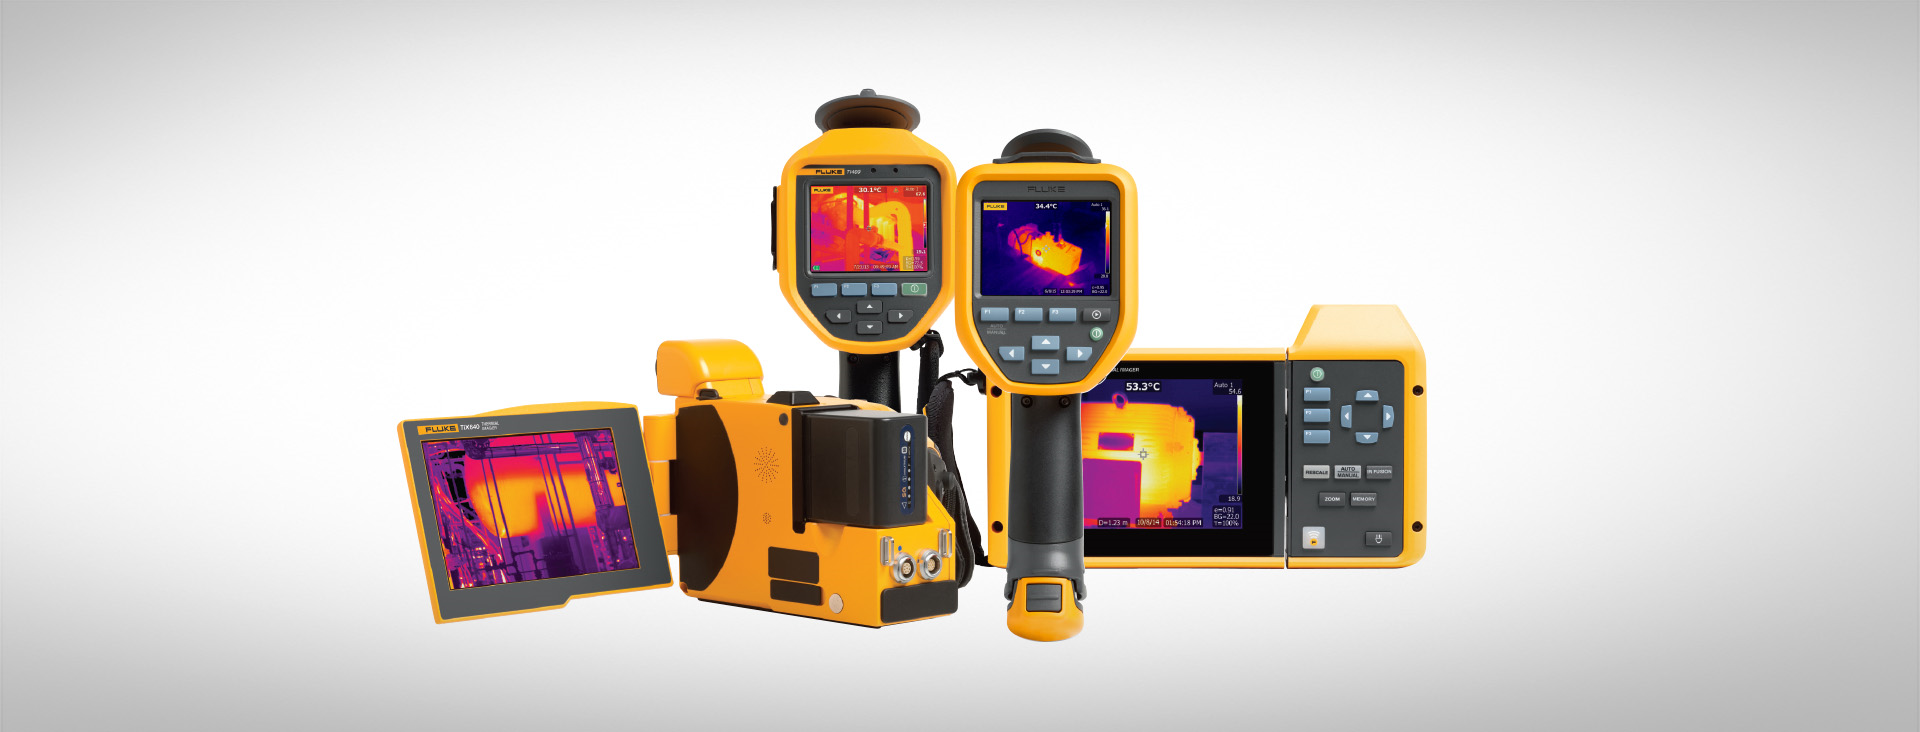 Fluke thermography. The Tools of choice.